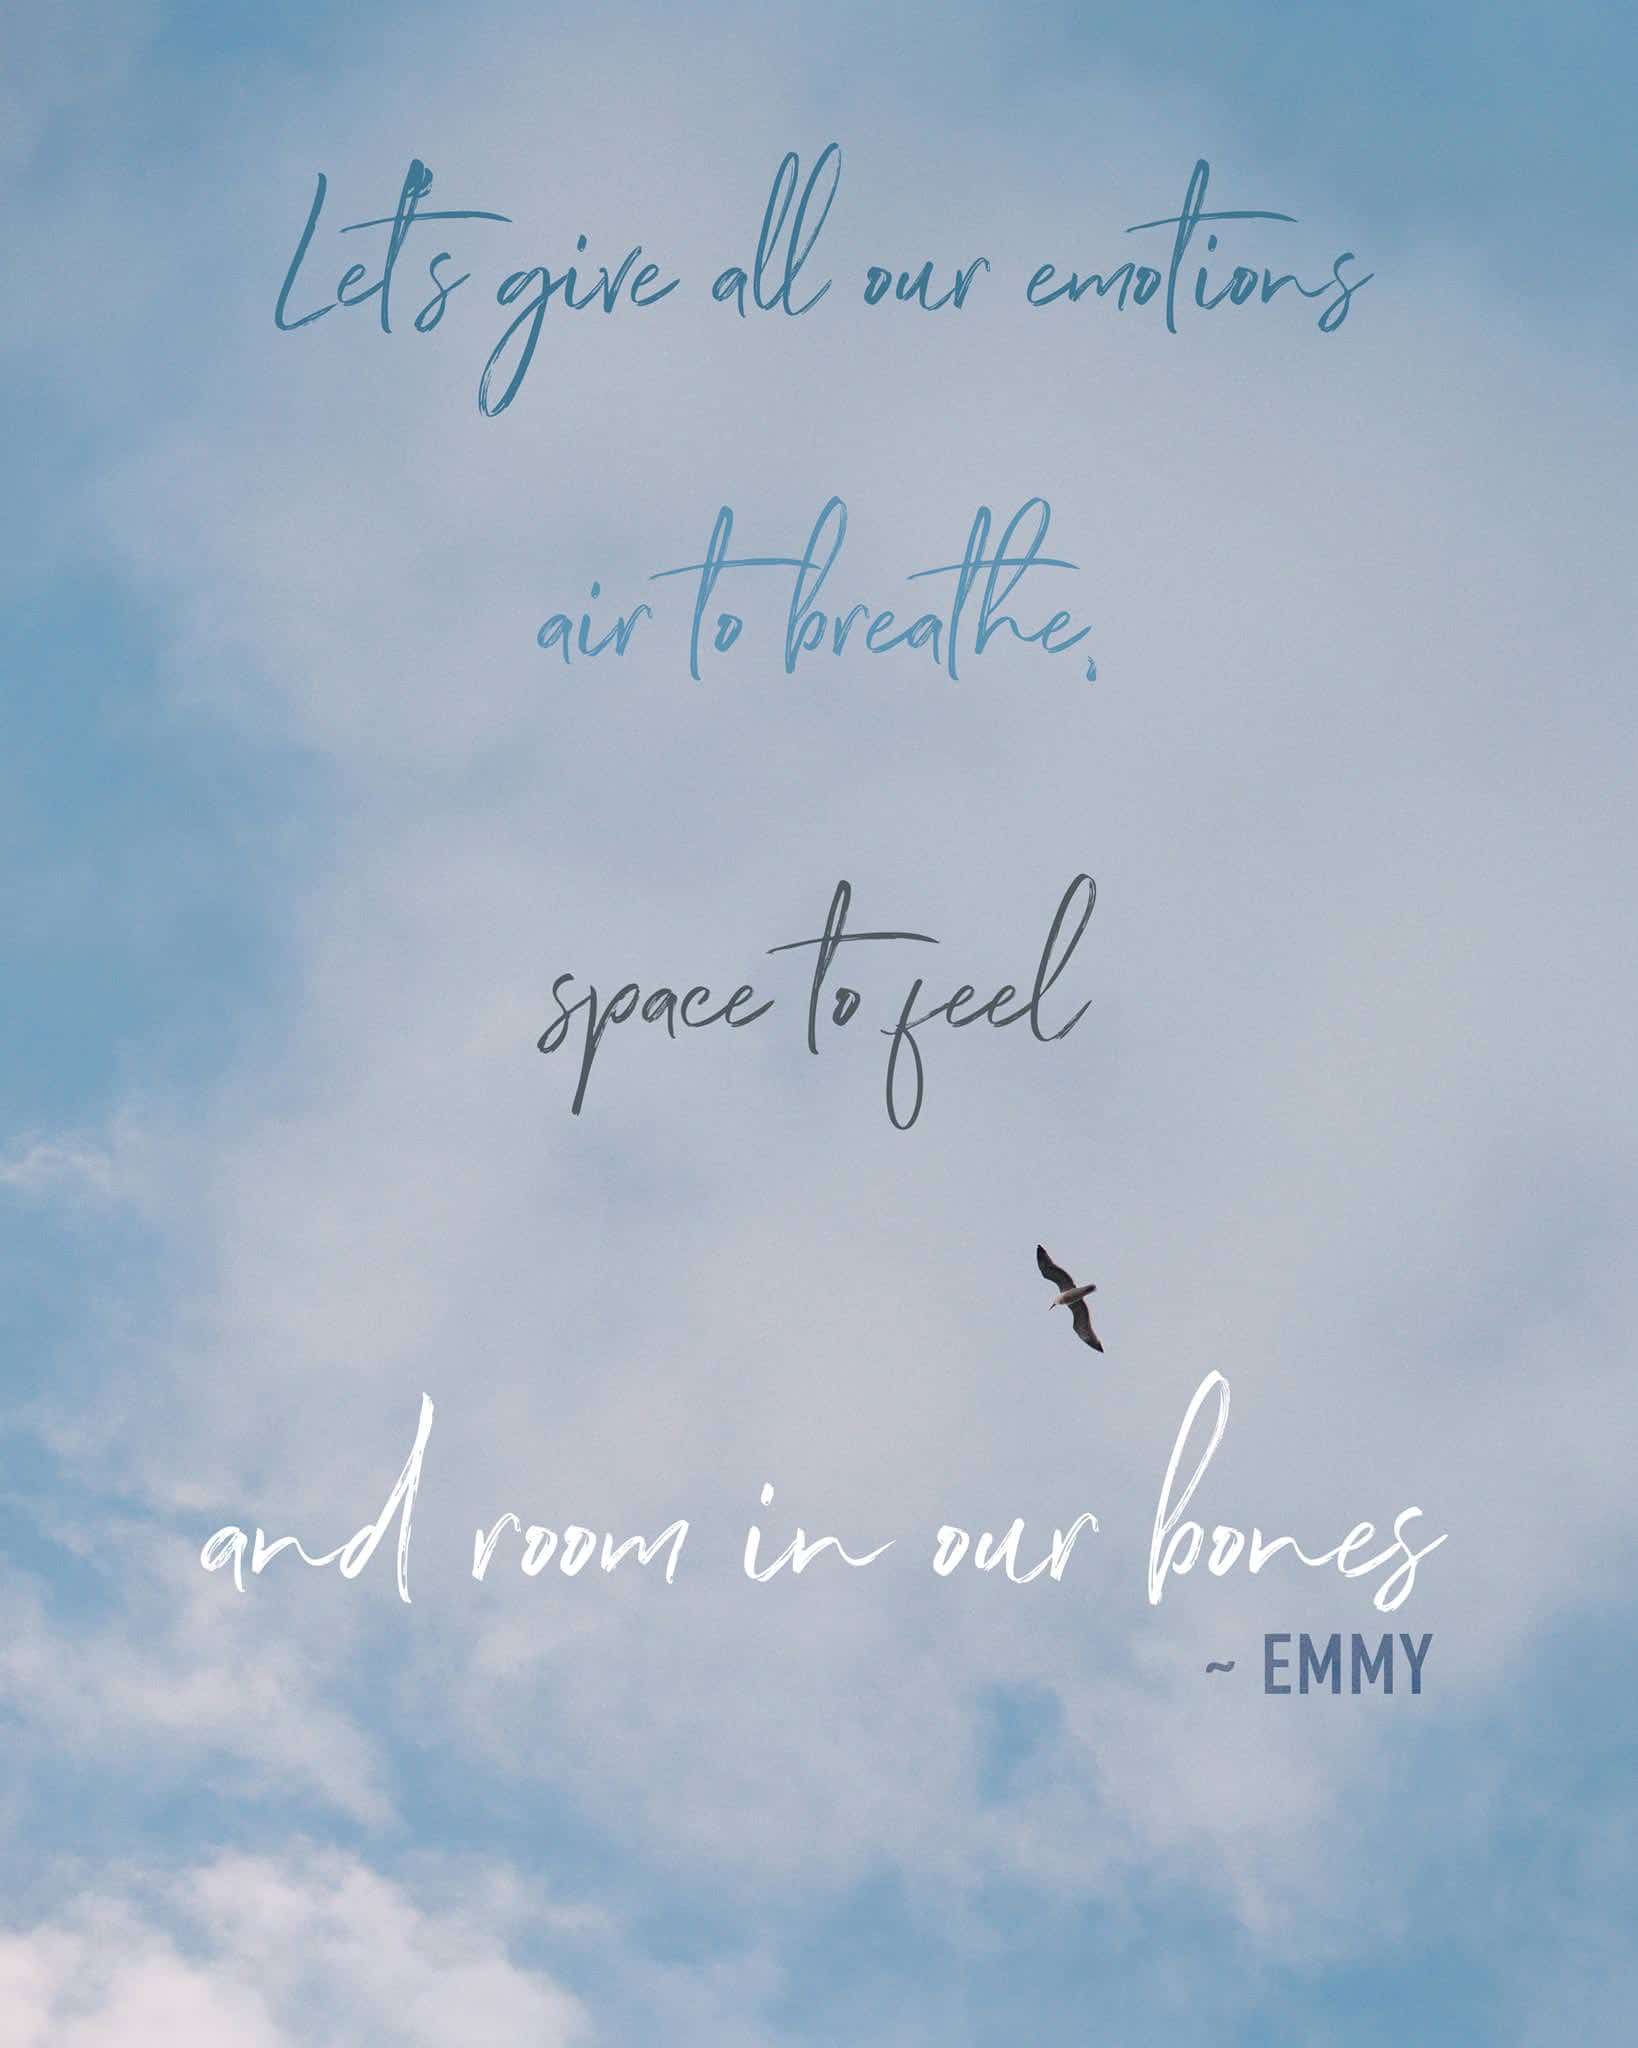 "Let’’s give all our emotions  air to breathe,  space to feel and room in our bones" quote by Emmy over an image of the sky with a bird flying